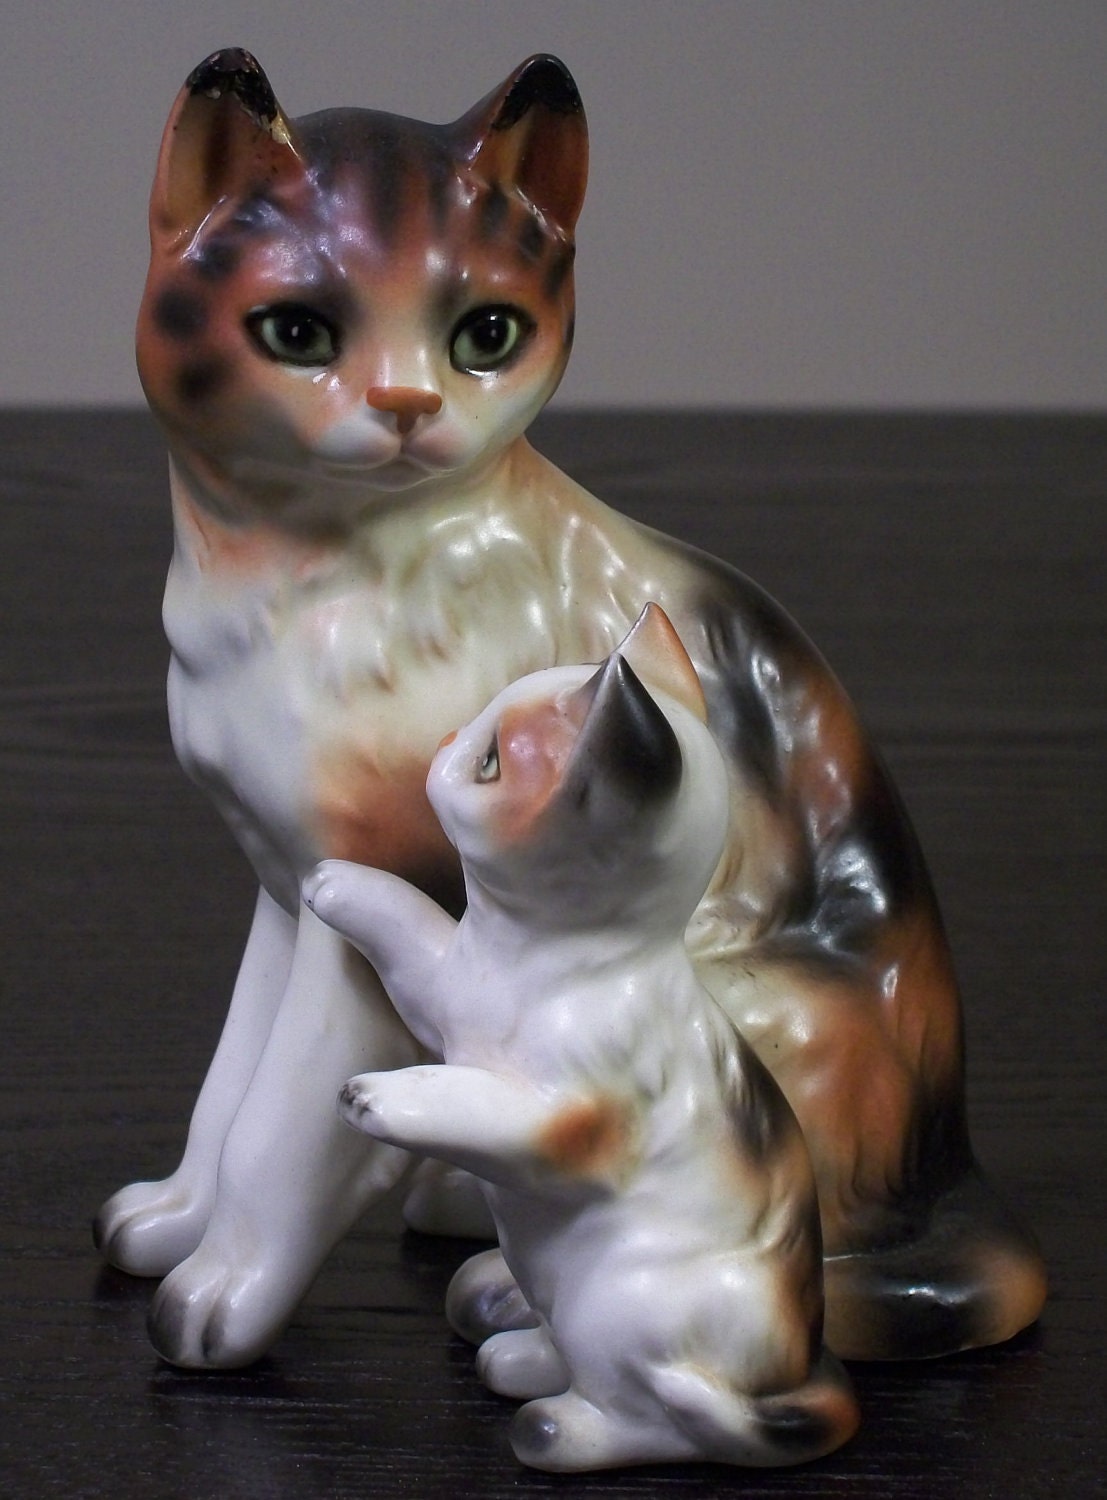 Vintage Mother Cat and Kitten Ceramic Figurine Calico Tortoise Shell Cats 1950's Made in Japan